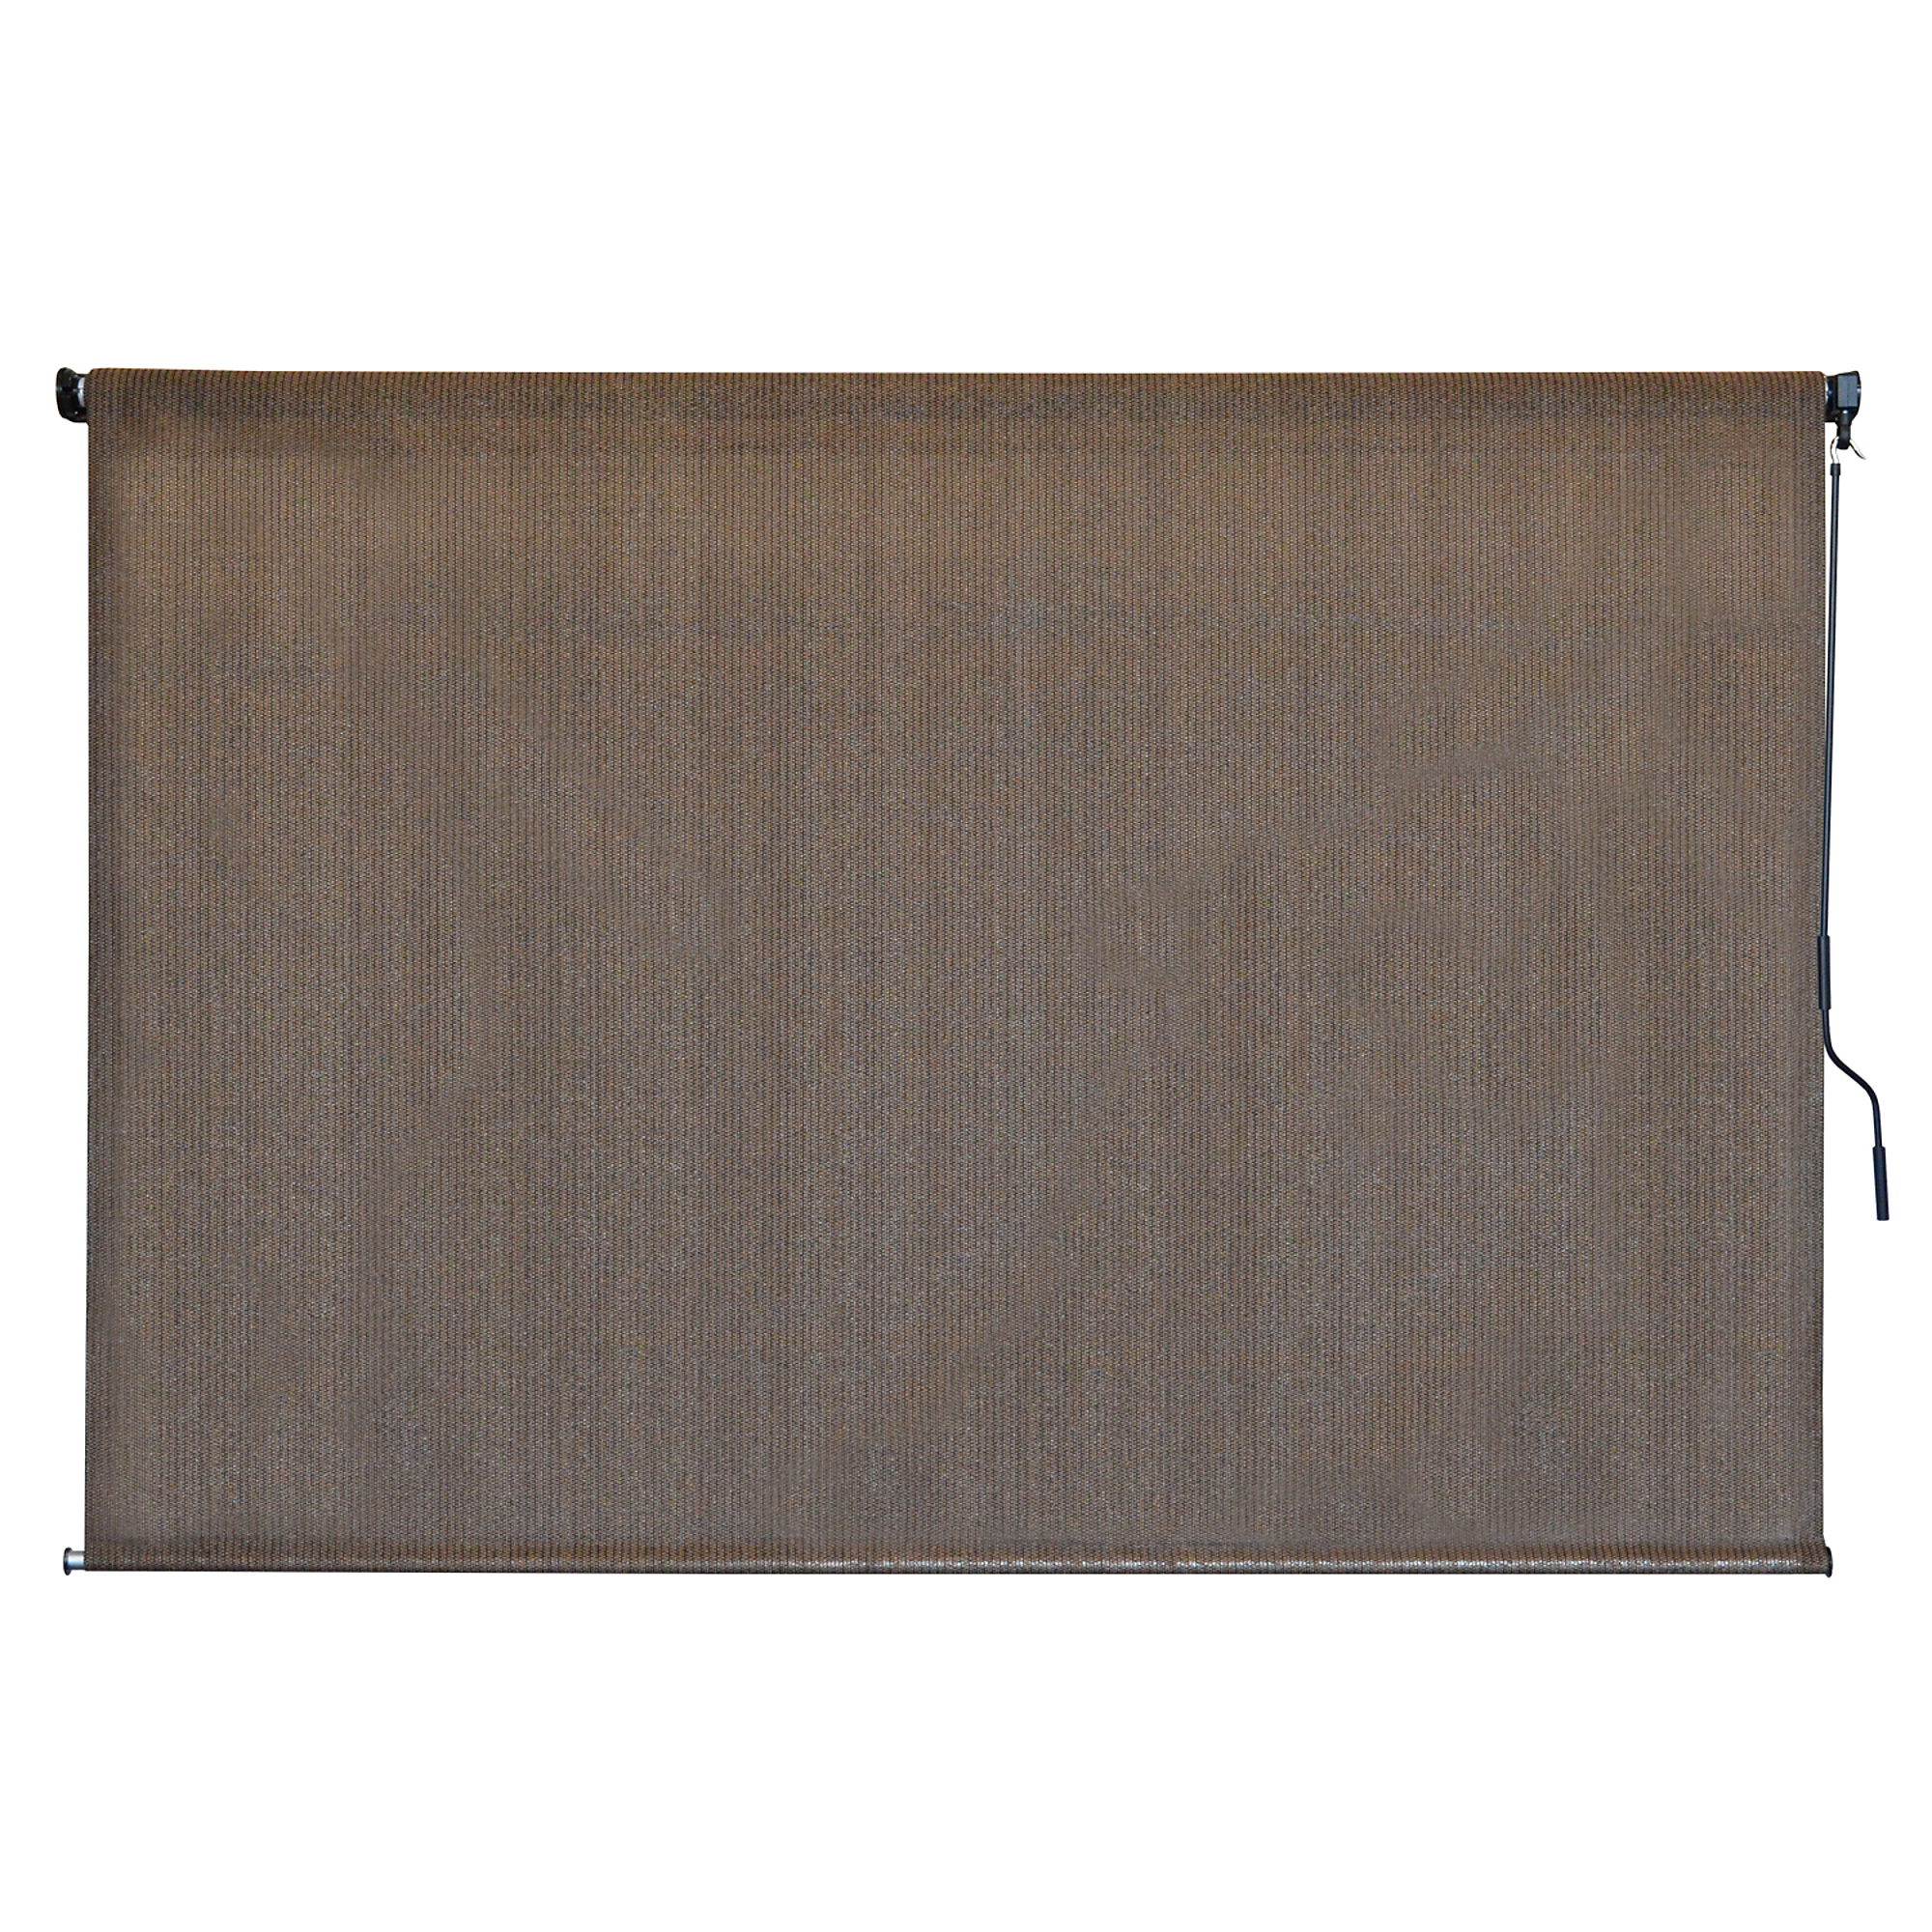 Shade Champ, Outdoor Sun Shade, Width 96 in, Length 72 in, Material Polyethylene, Model 20NT86